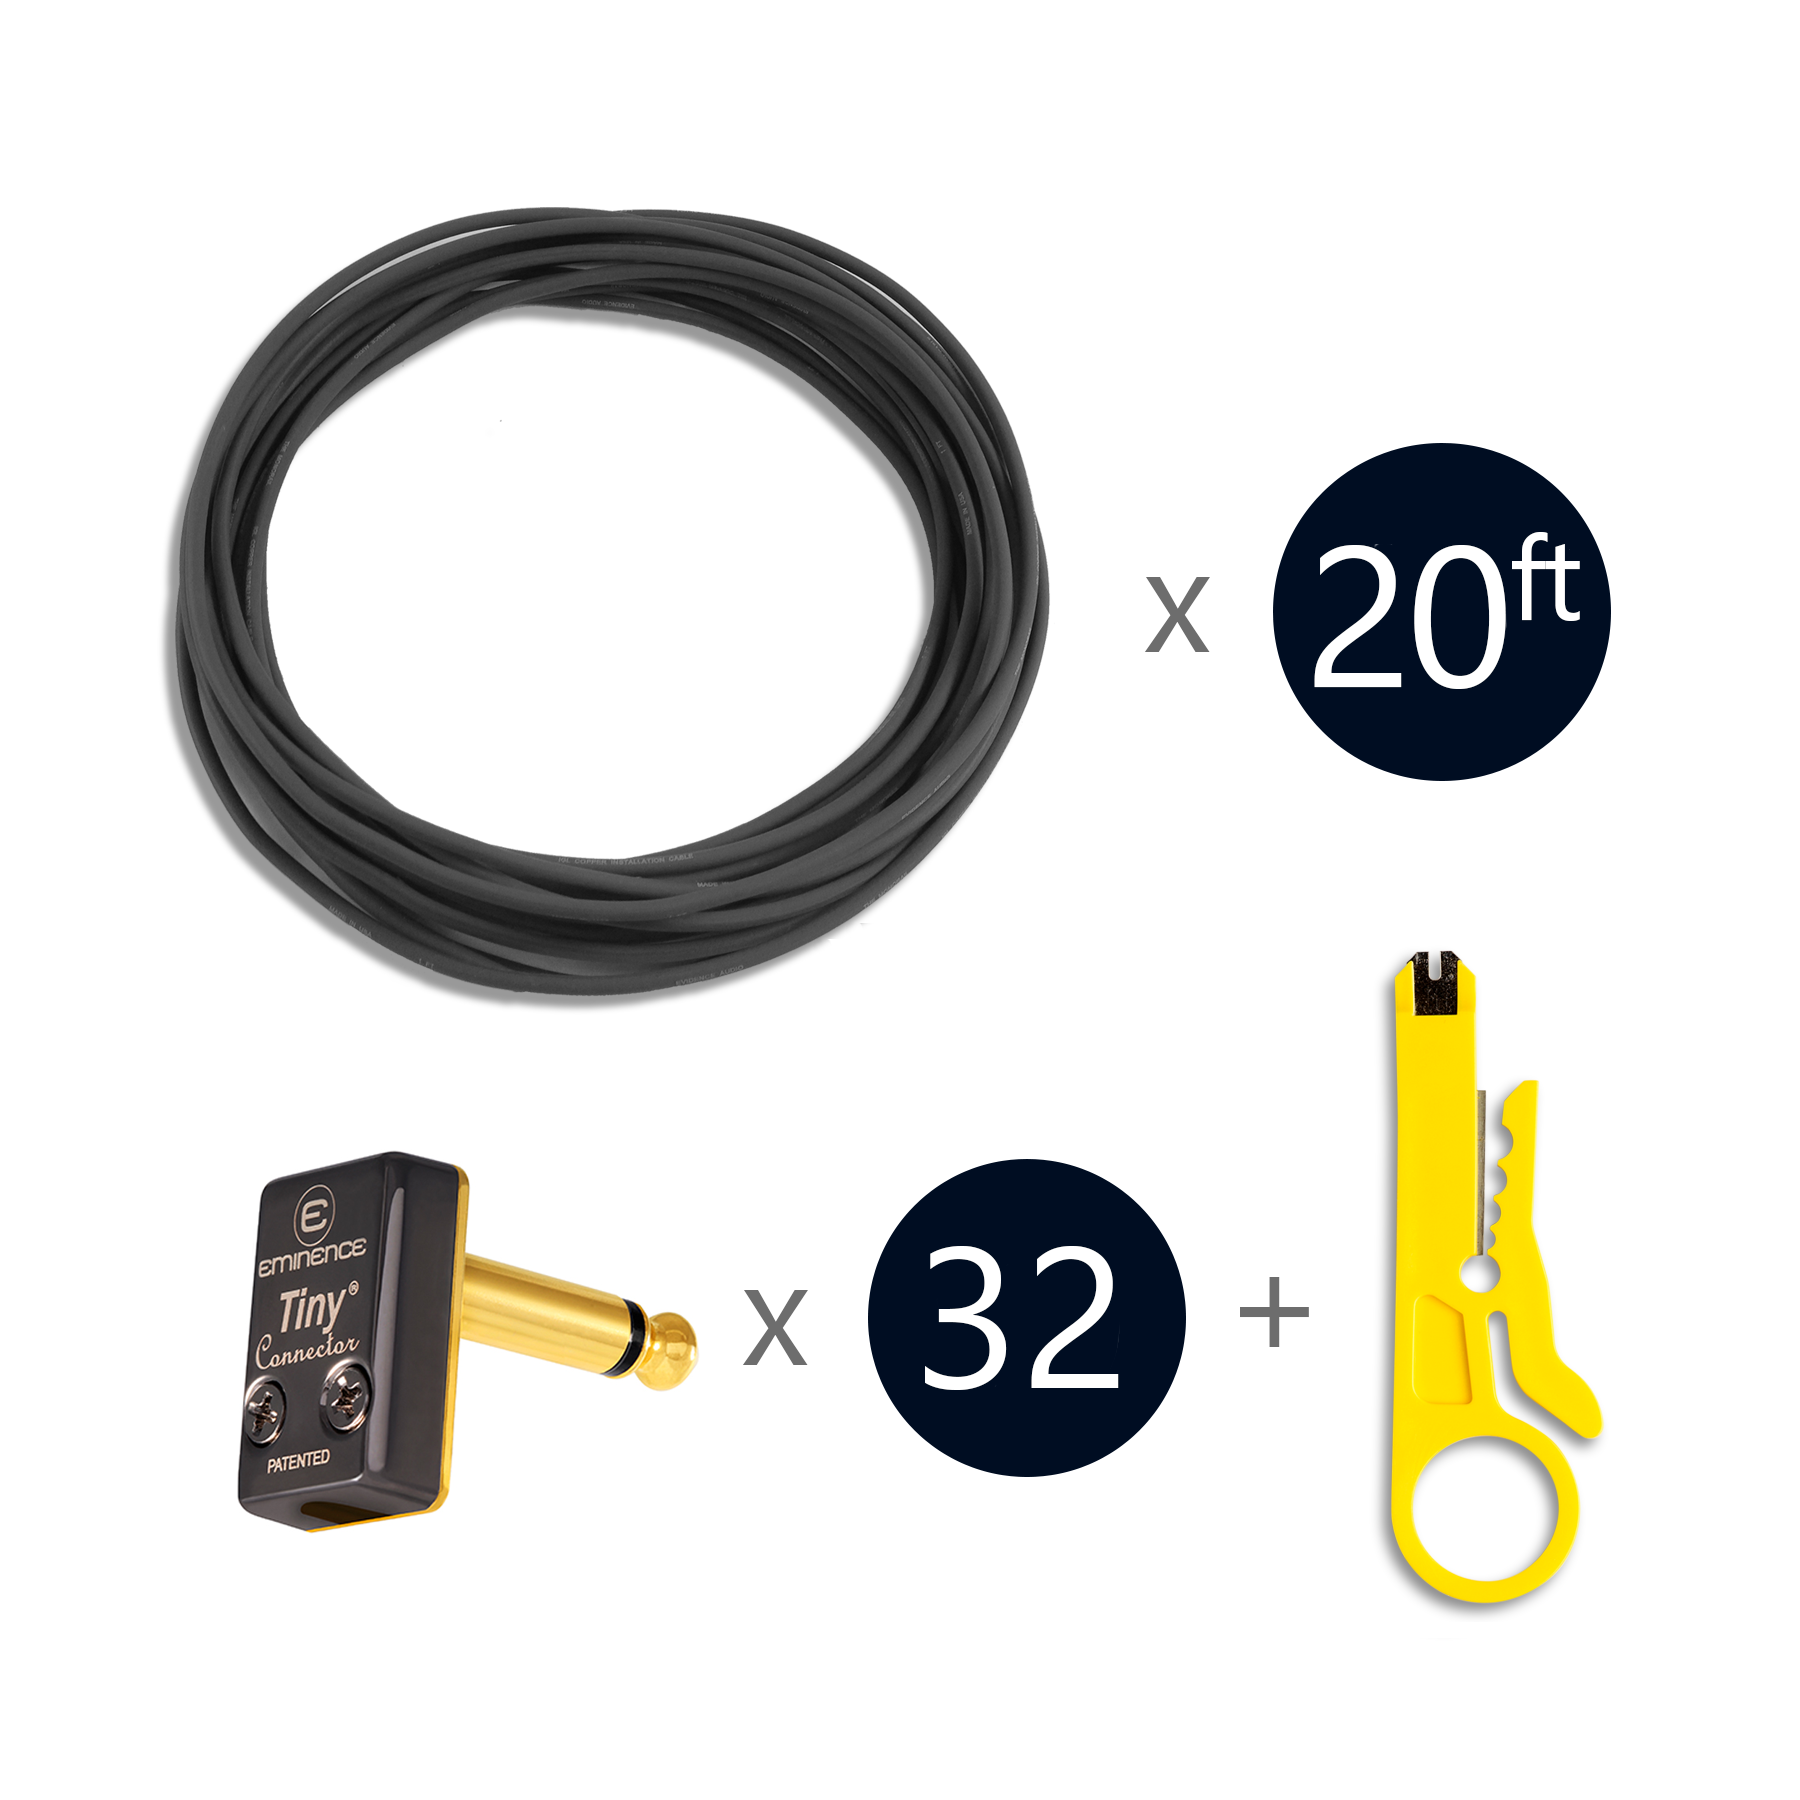 32 ft Evidence Audio Monorail cable + 32 x Eminence Tiny connector Plug + cable cutter tool